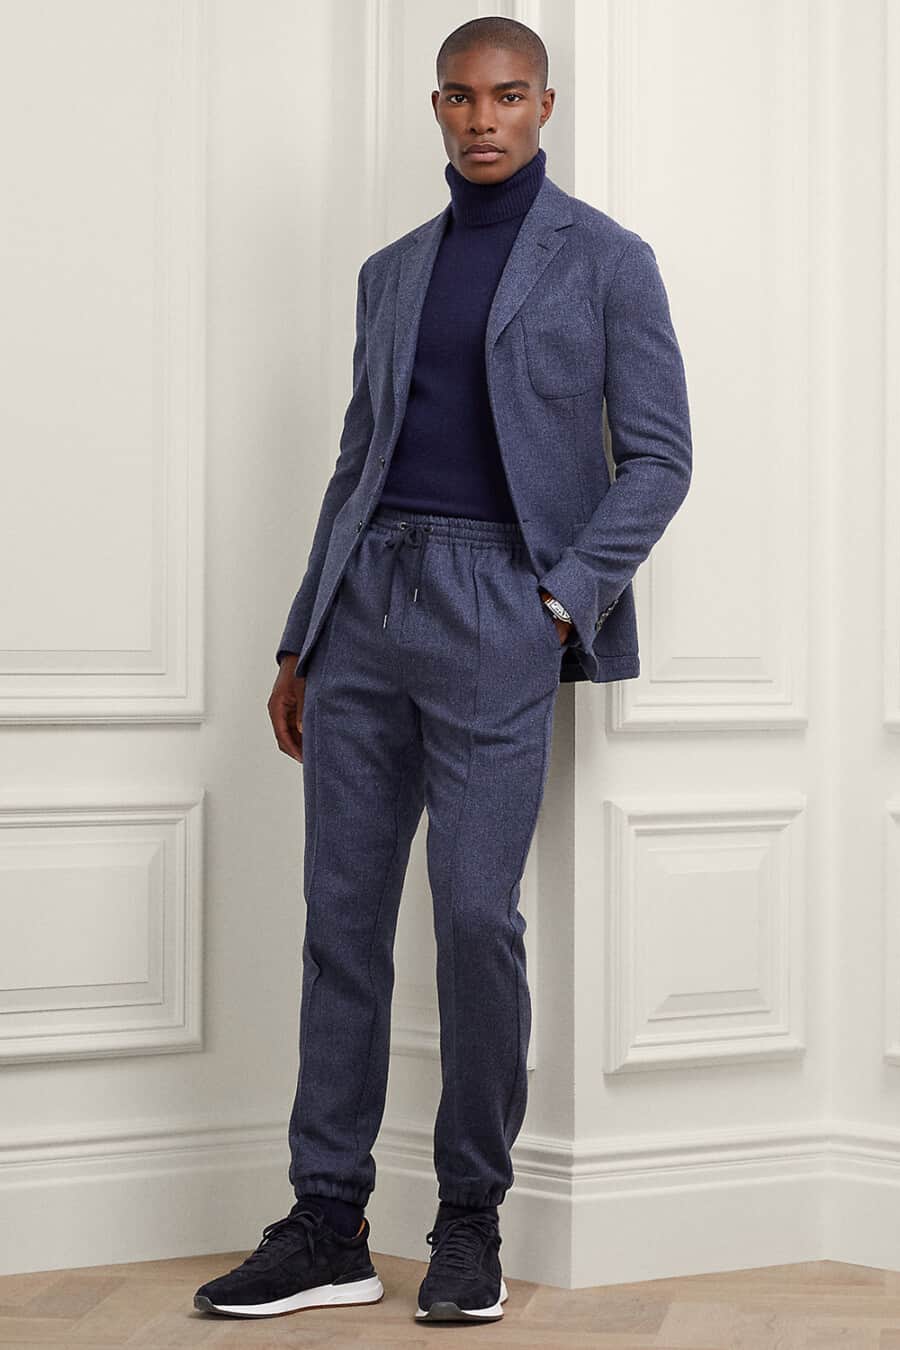 Men's mid blue drawstring suit, navy turtleneck and navy sneakers outfit